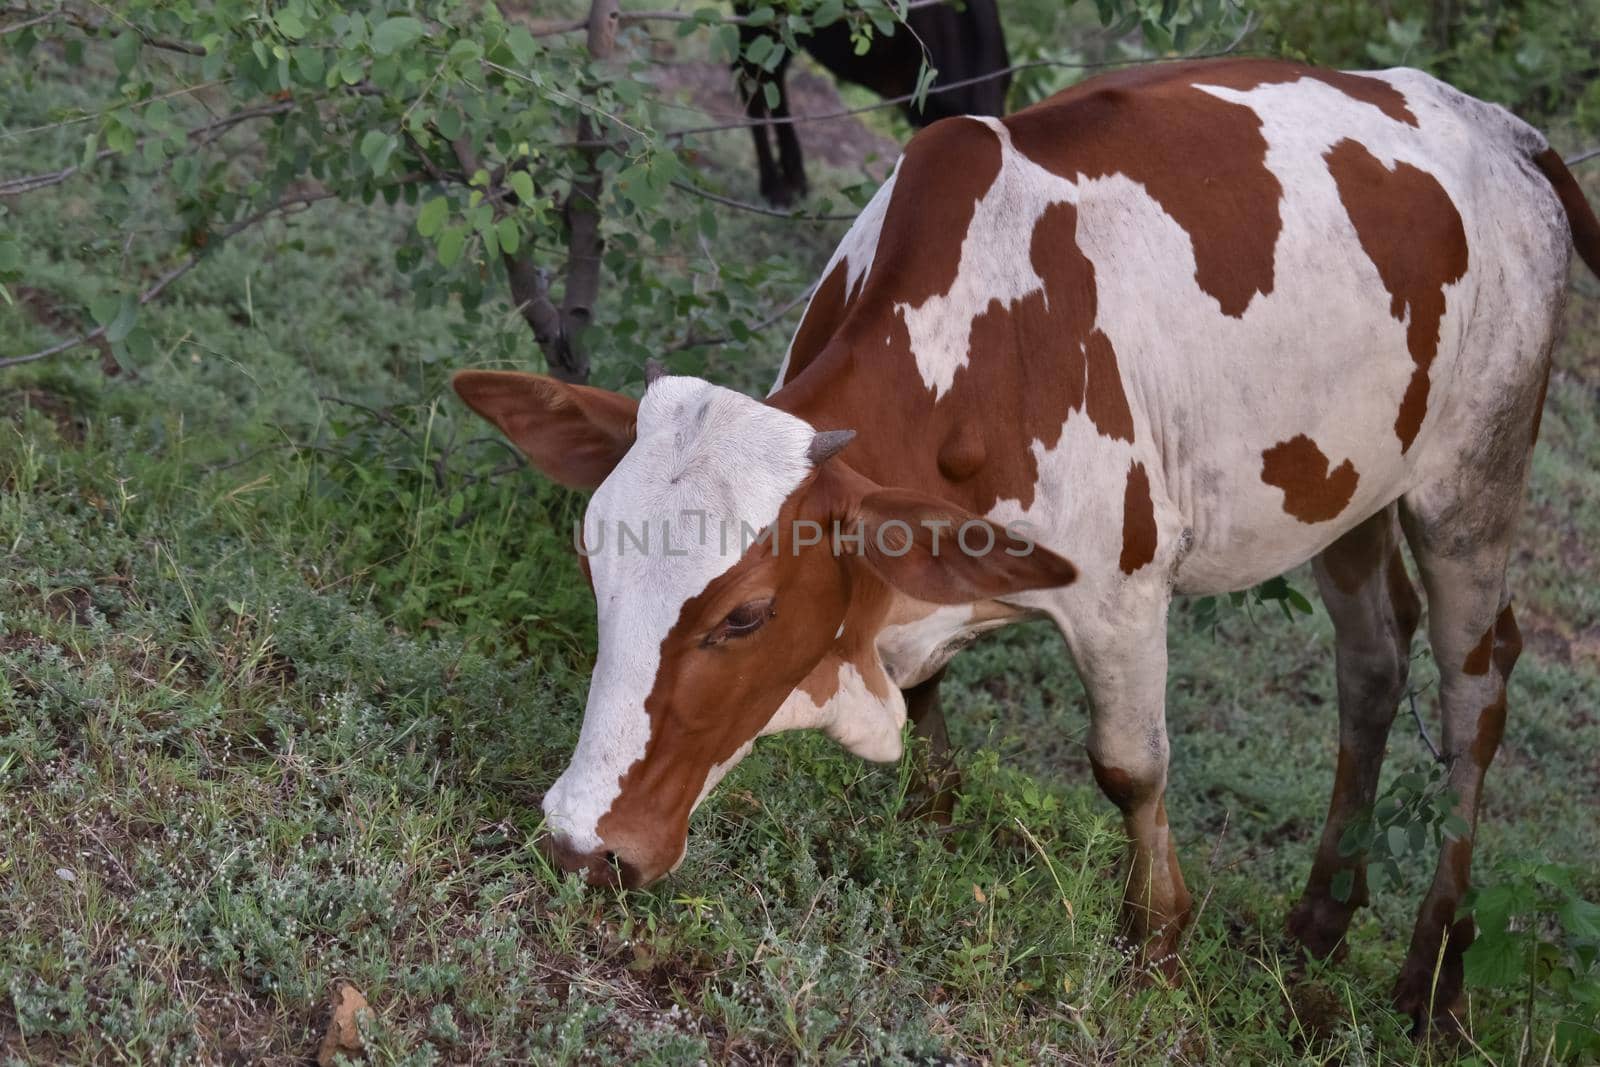 cow eating grass in a paddy field. Indian animal image